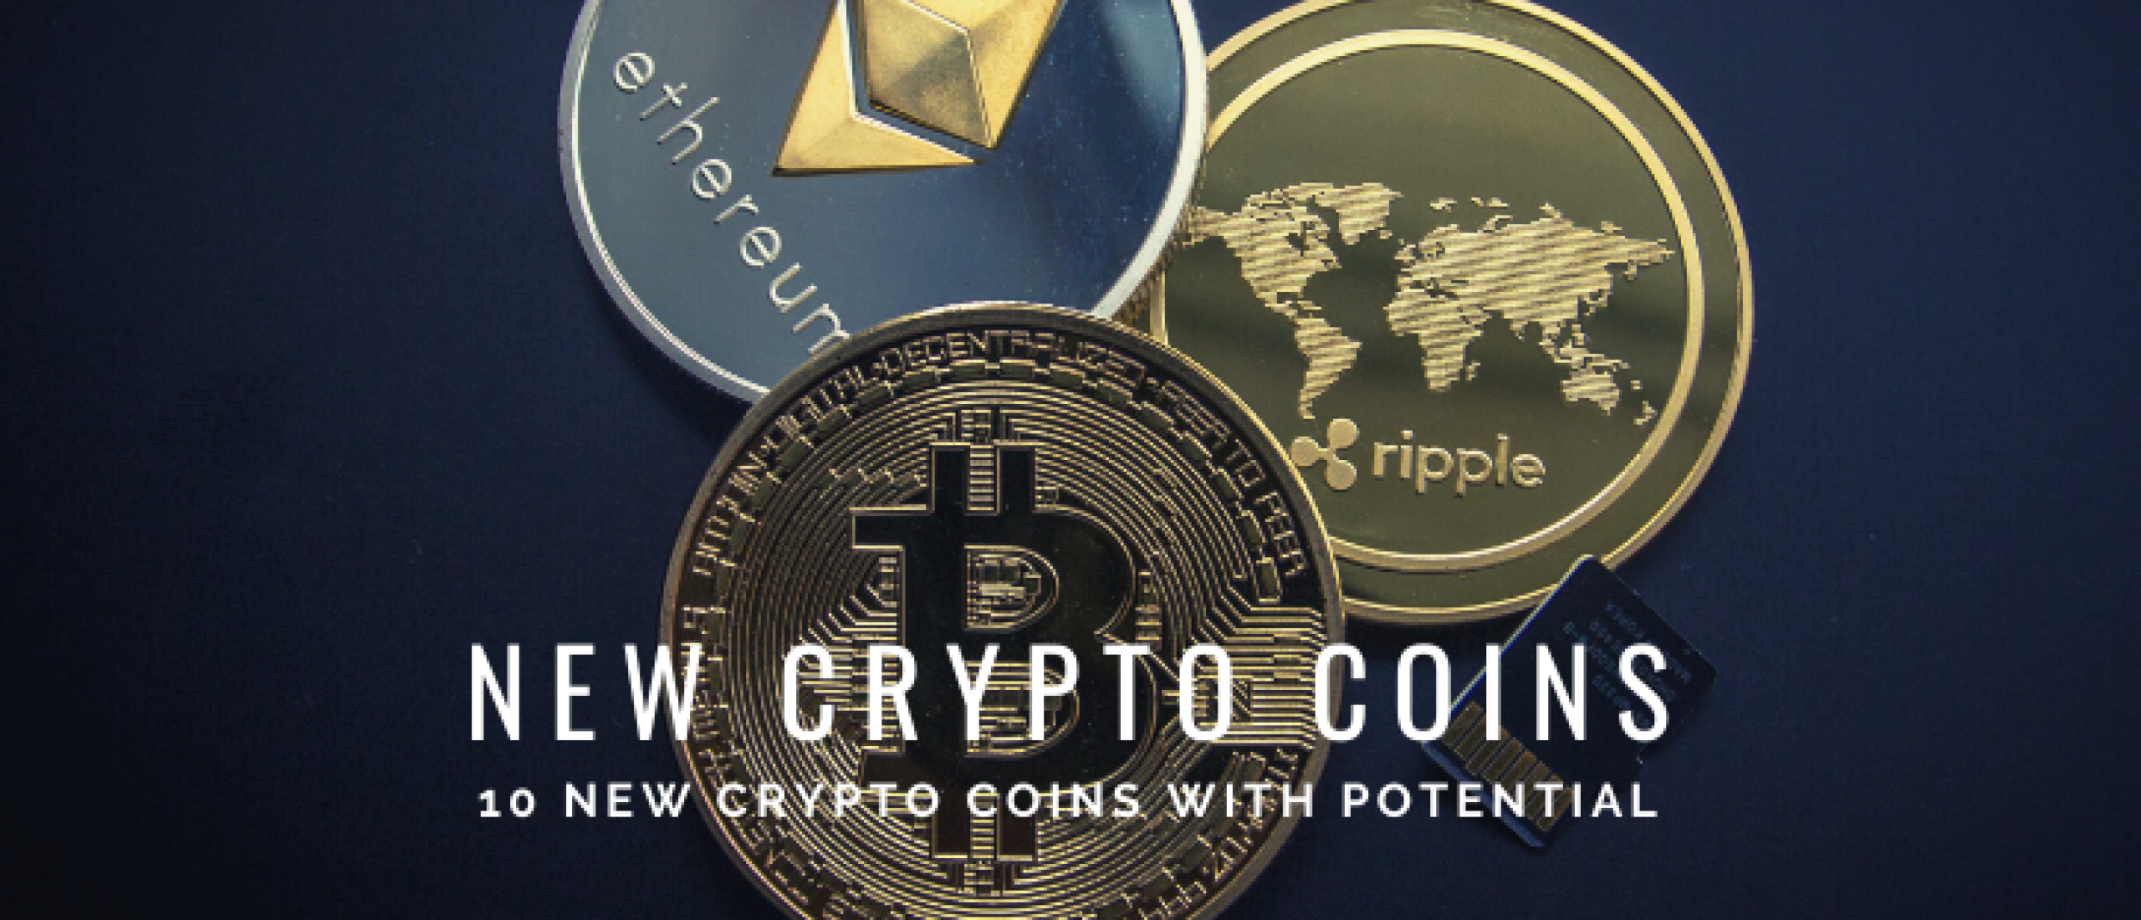 brand new crypto coins with potential